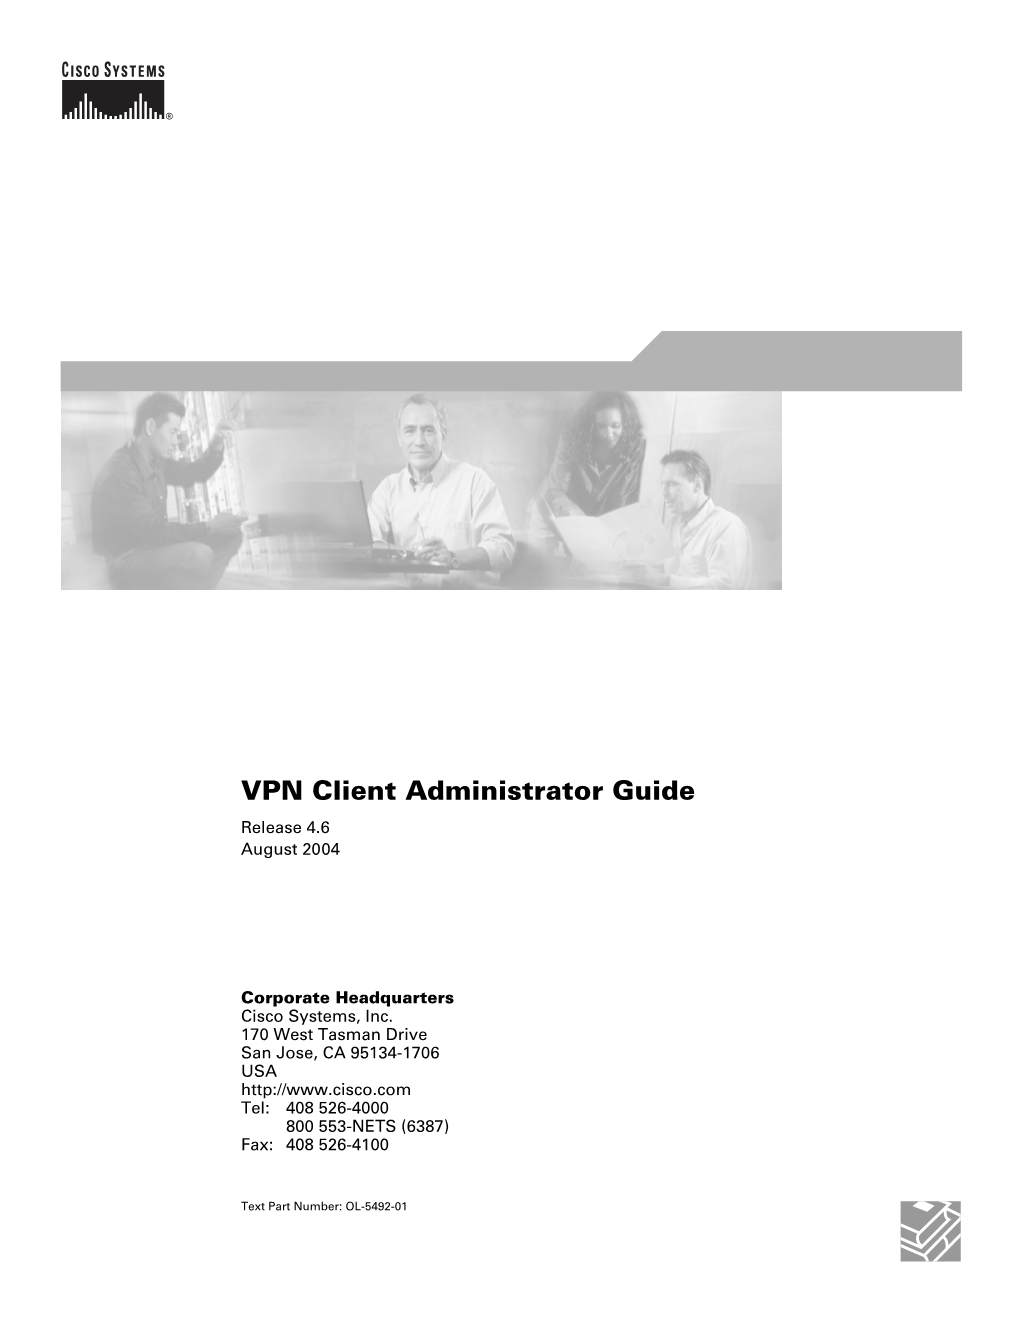 VPN Client Administrator Guide, Release